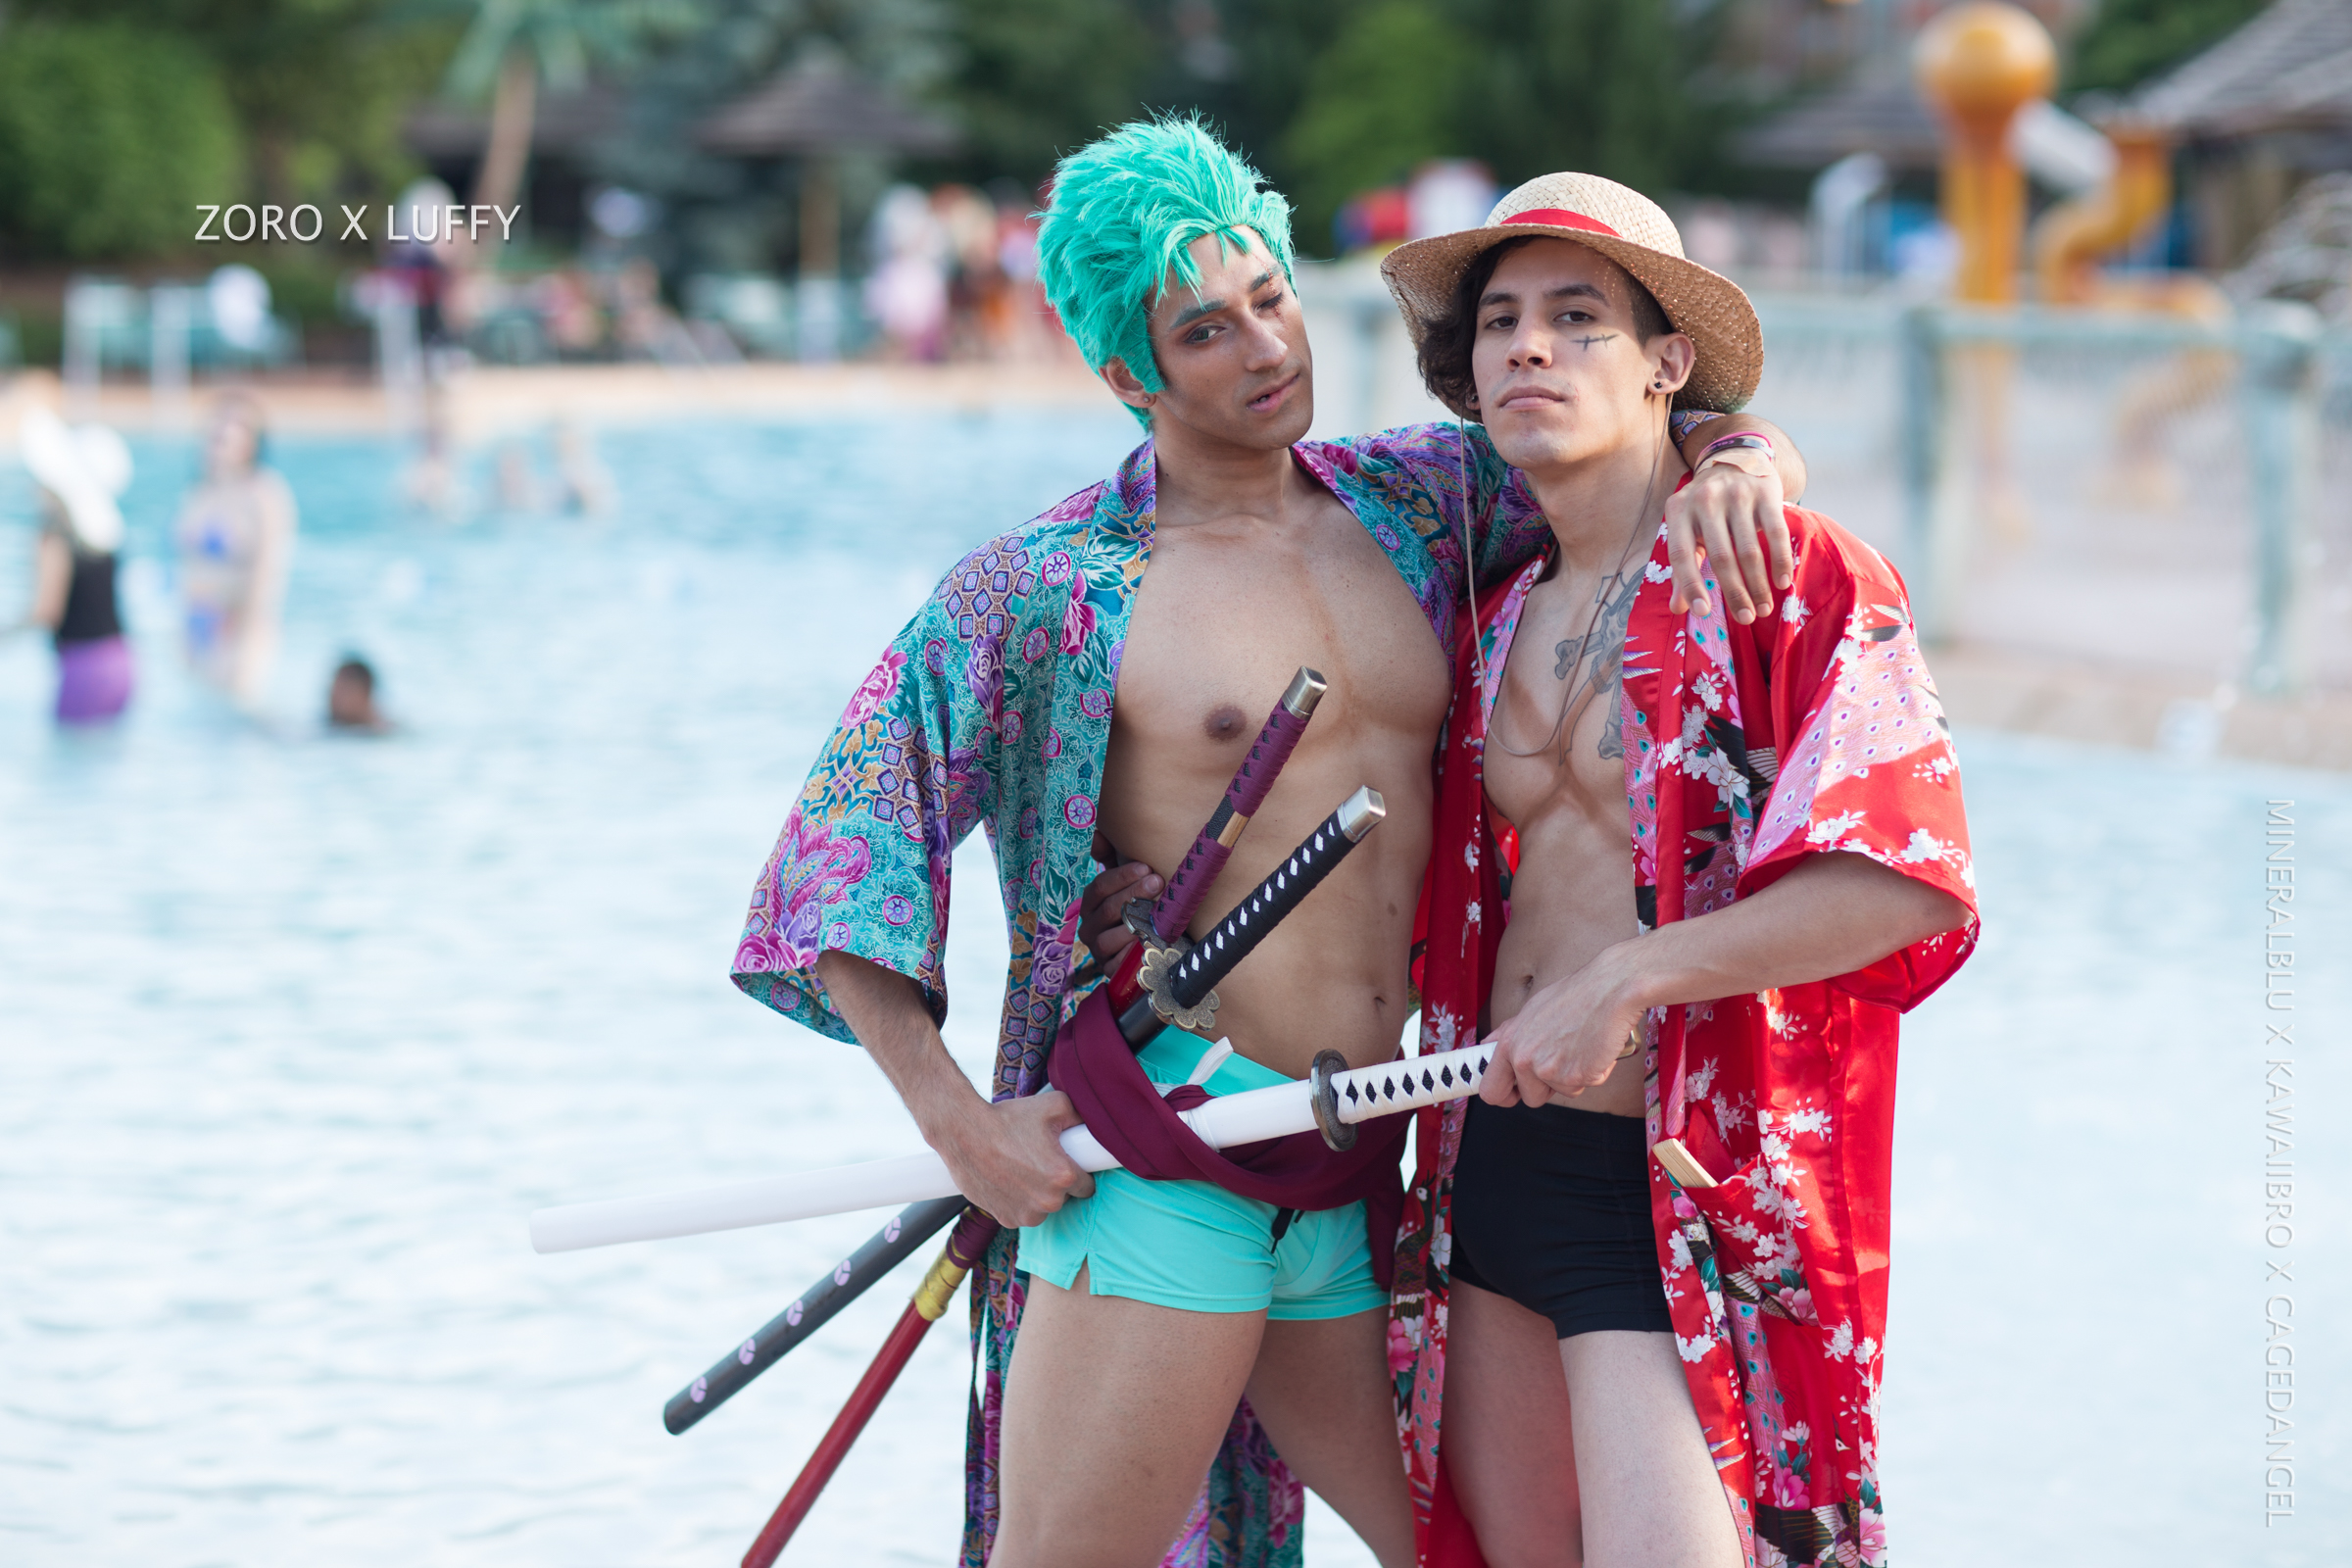 The Best Cosplay From ColossalCon, One Of The Biggest Shows Of The Year